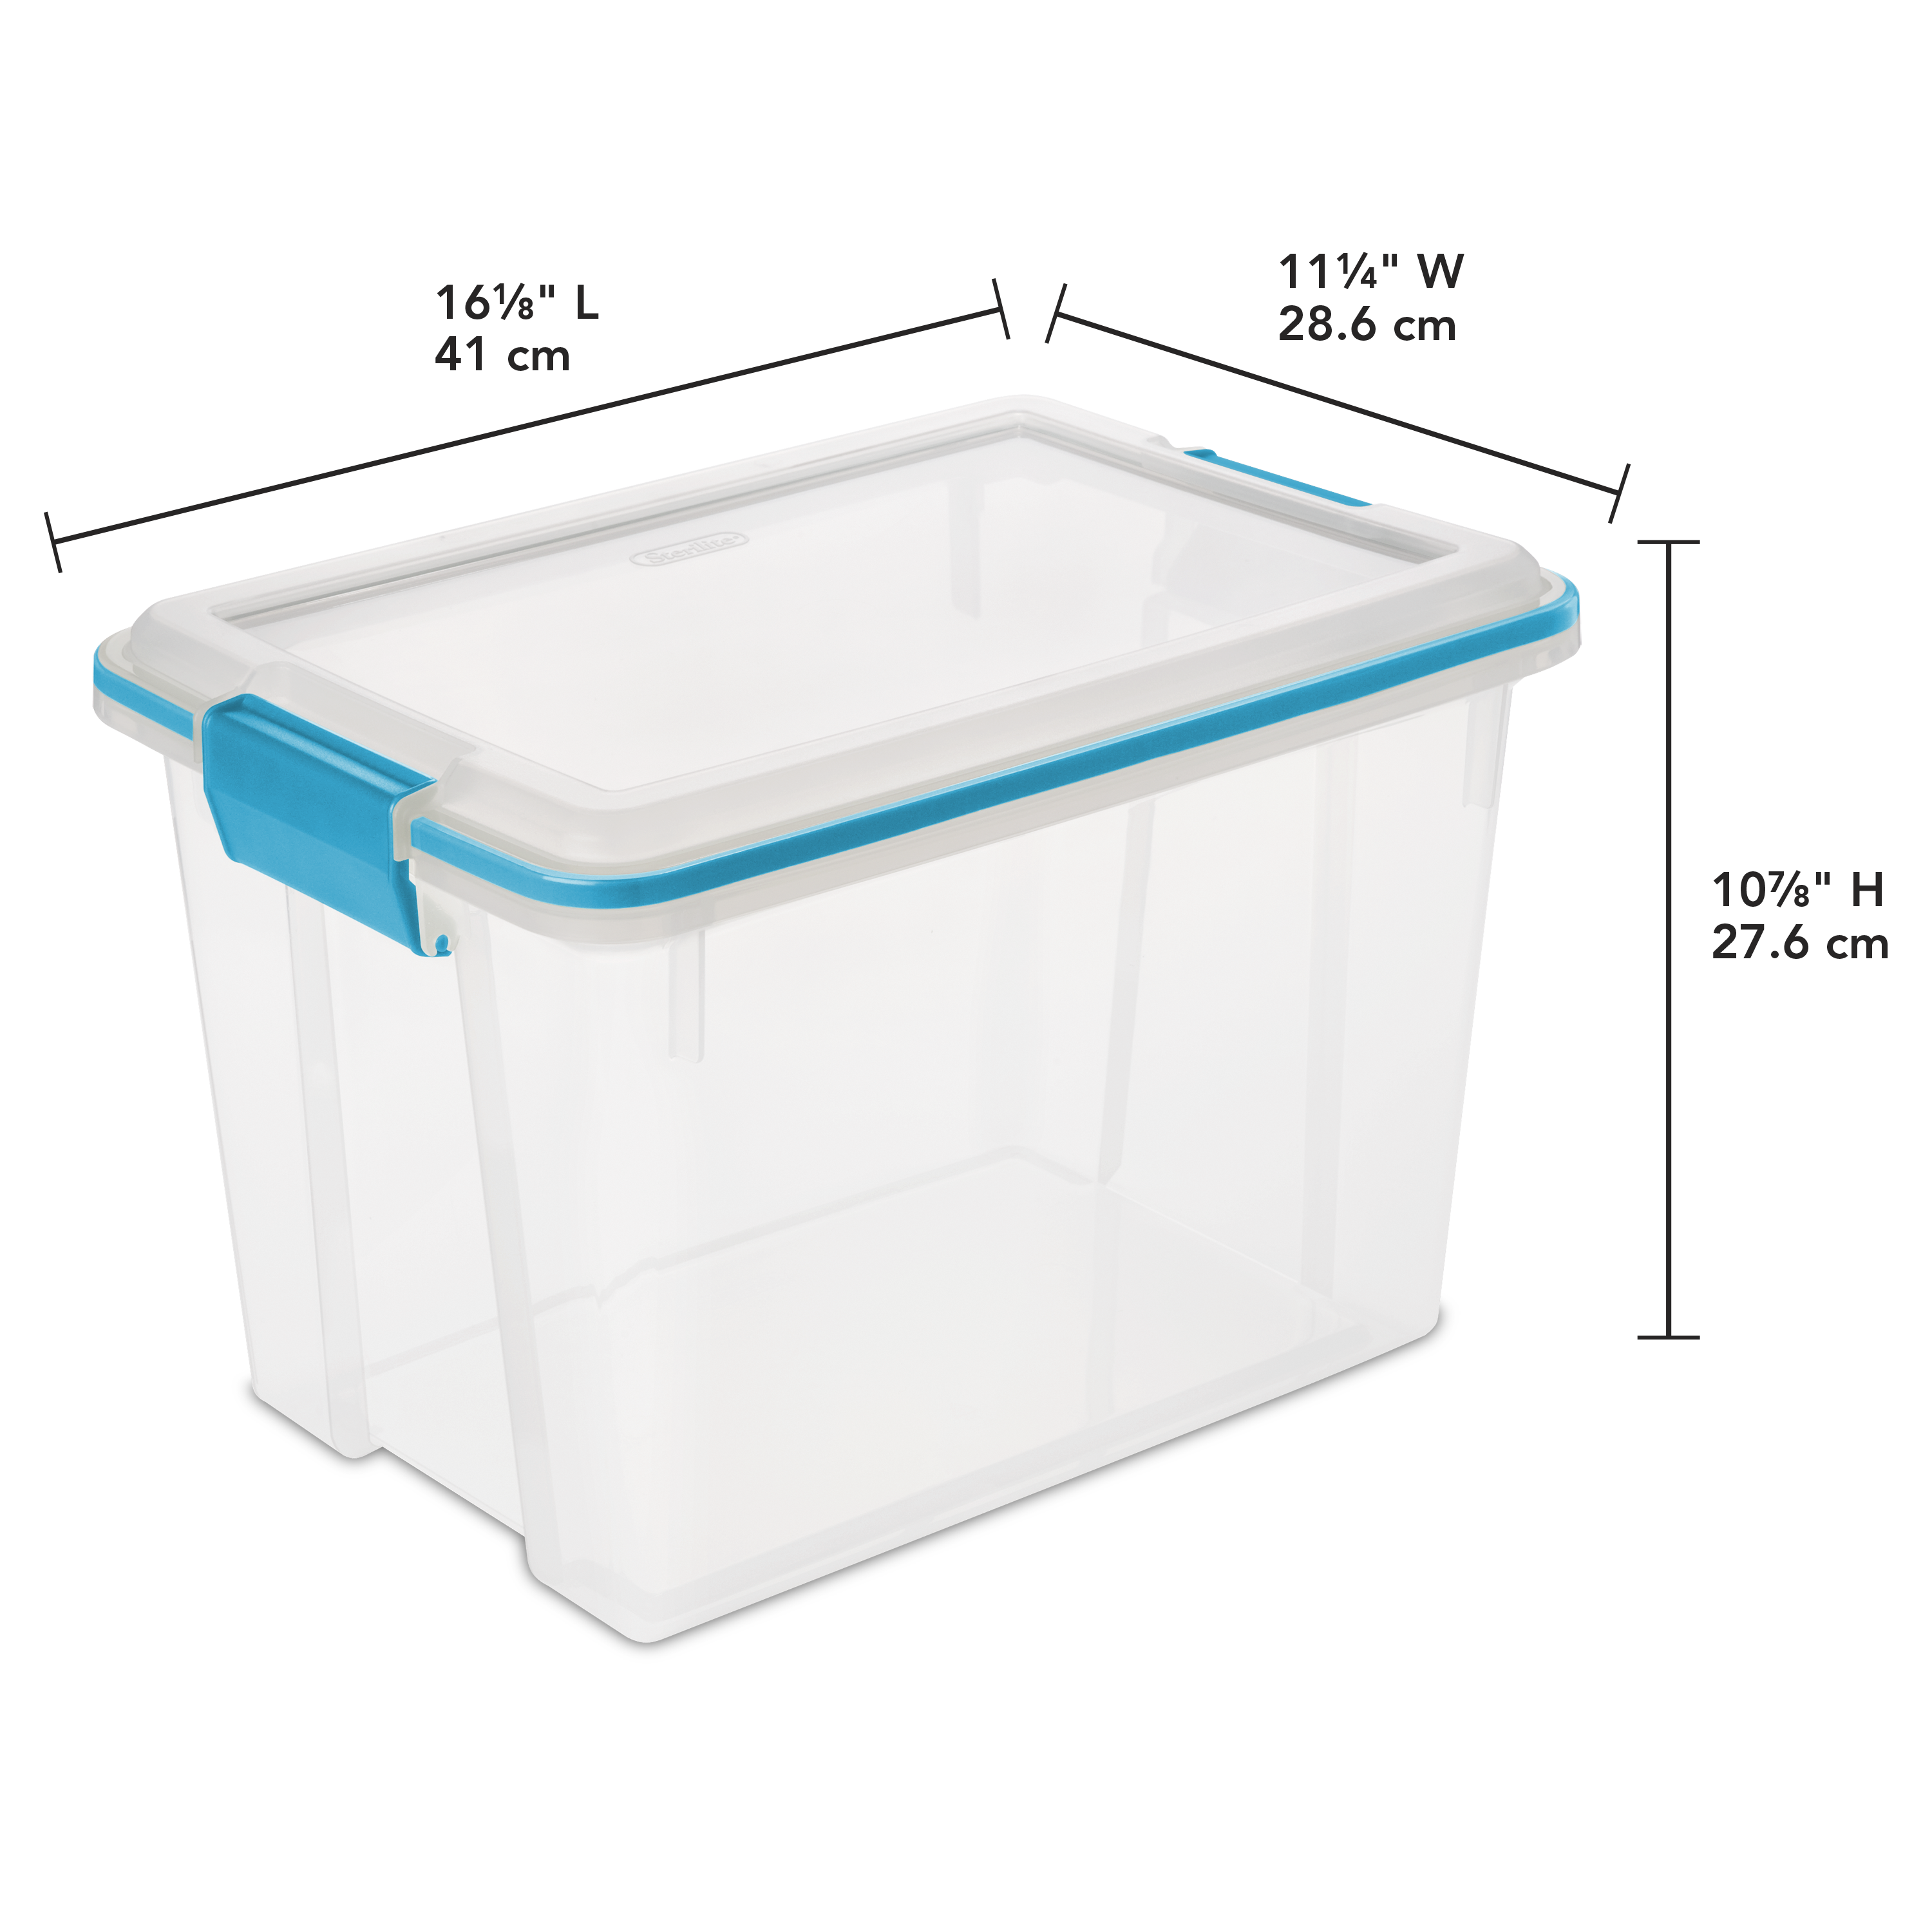 Sterilite 20 Quart Clear Gasket Box with Blue Latches & Gasket - image 4 of 9